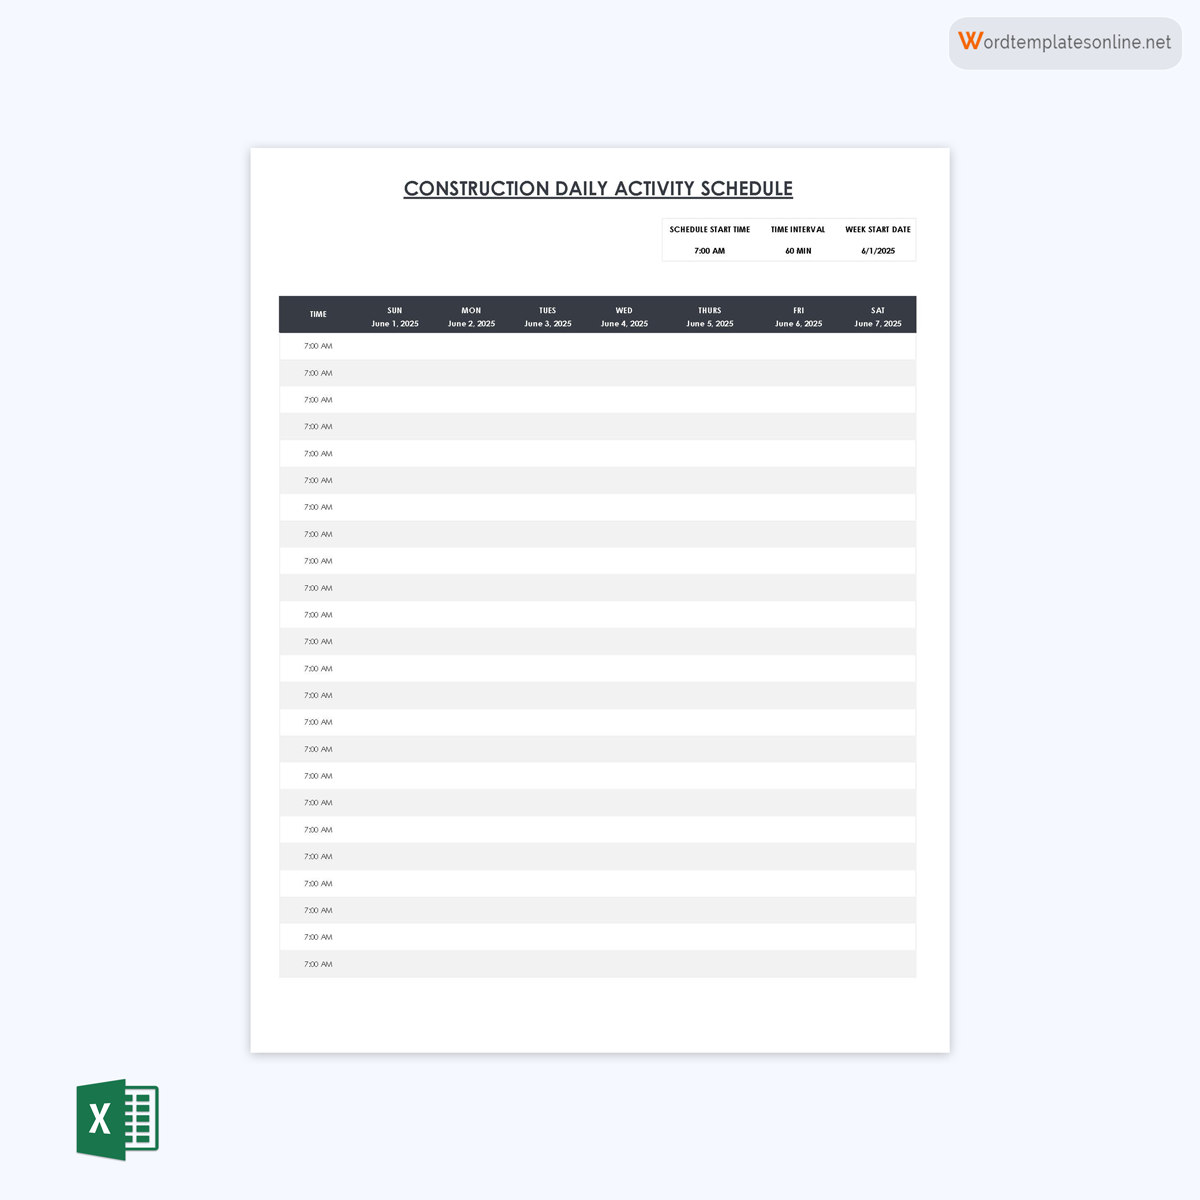 Free Printable Daily Construction Schedule Template 02 as Excel Sheet